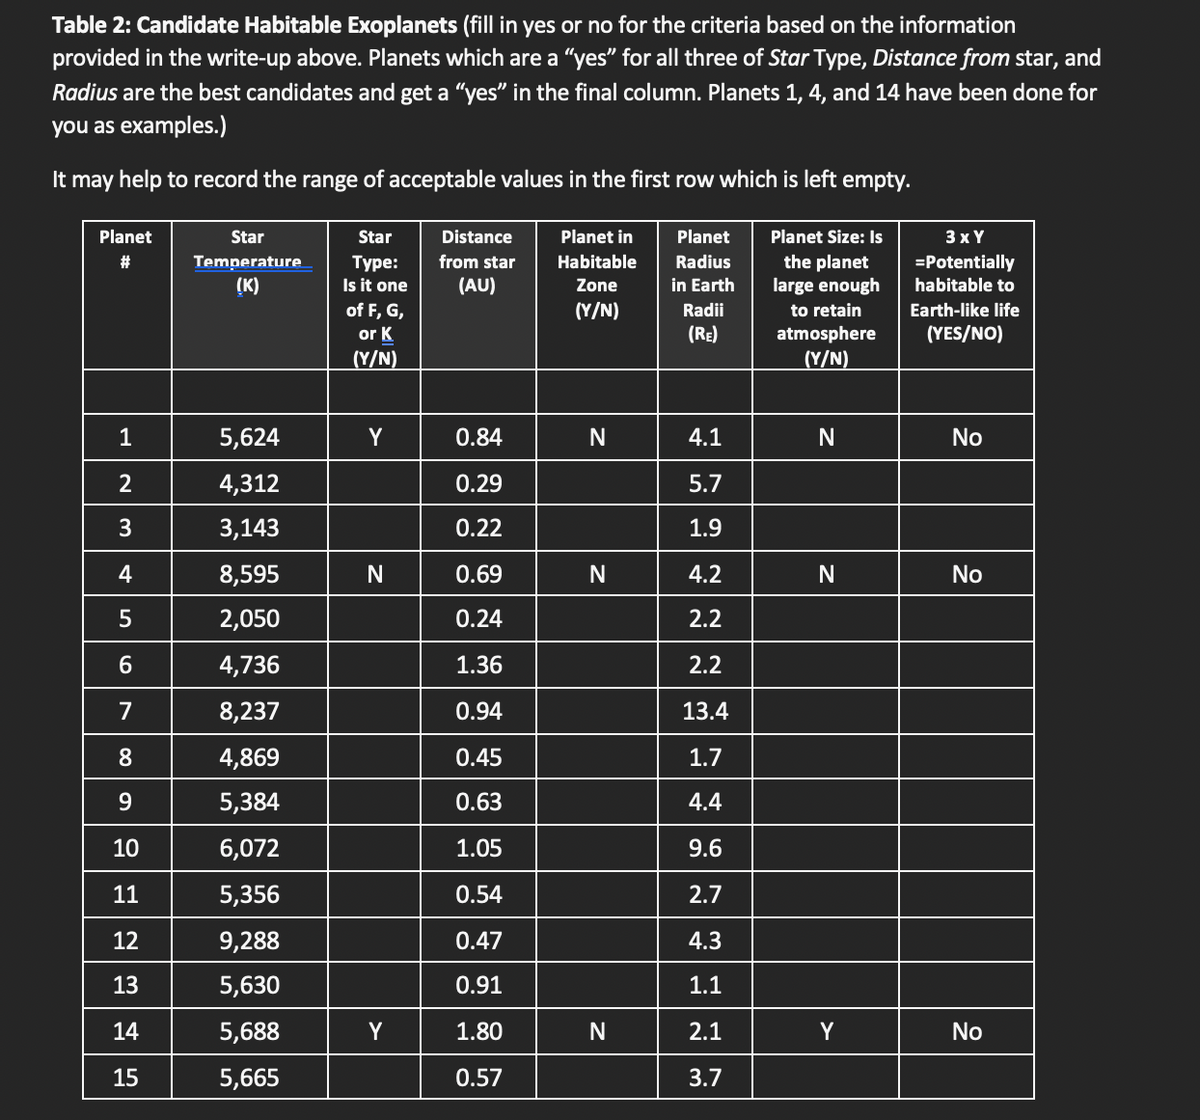 Table 2: Candidate Habitable Exoplanets (fill in yes or no for the criteria based on the information
provided in the write-up above. Planets which are a "yes" for all three of Star Type, Distance from star, and
Radius are the best candidates and get a "yes" in the final column. Planets 1, 4, and 14 have been done for
you as examples.)
It may help to record the range of acceptable values in the first row which is left empty.
Planet
Star
Star
Distance
Planet in
Planet
Planet Size: Is
3 x Y
from star
Habitable
Radius
the planet
large enough
23
Temperature
=Potentially
Туре:
Is it one
(K)
(AU)
Zone
in Earth
habitable to
(Y/N)
of F, G,
or K
(Y/N)
Radii
to retain
Earth-like life
(RE)
atmosphere
(YES/NO)
(Y/N)
1
5,624
Y
0.84
N
4.1
No
4,312
0.29
5.7
3
3,143
0.22
1.9
4
8,595
0.69
N
4.2
No
5
2,050
0.24
2.2
4,736
1.36
2.2
7
8,237
0.94
13.4
8
4,869
0.45
1.7
9
5,384
0.63
4.4
10
6,072
1.05
9.6
11
5,356
0.54
2.7
12
9,288
0.47
4.3
13
5,630
0.91
1.1
14
5,688
Y
1.80
N
2.1
Y
No
15
5,665
0.57
3.7
